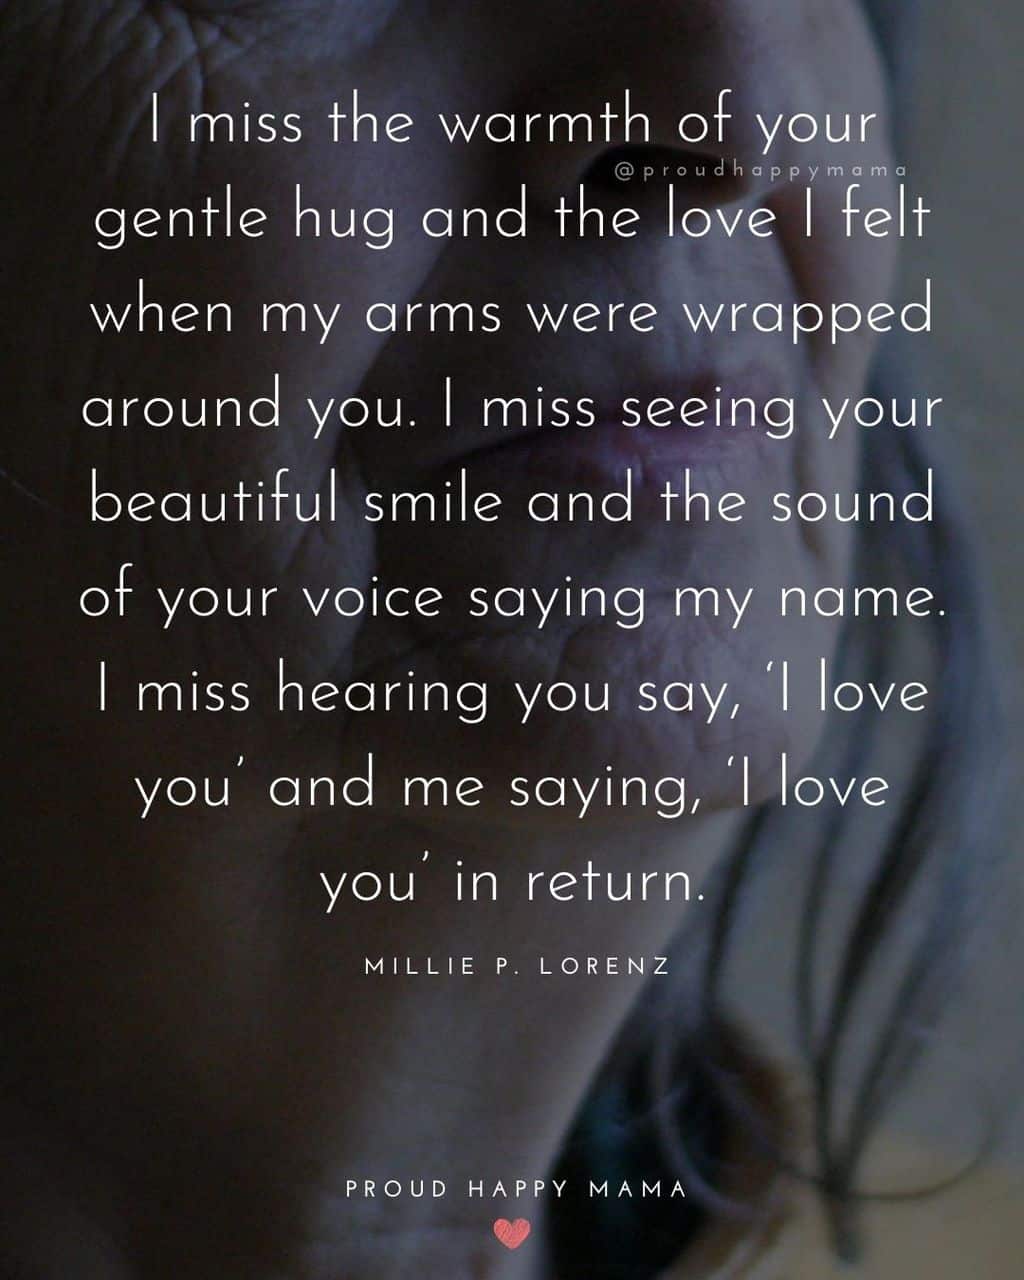 Close up of elderly mother's face with text overlay, ‘I miss the warmth of your gentle hug and the love I felt when my arms were wrapped around you. I miss seeing your beautiful smile and the sound of your voice saying my name. I miss hearing you say, ‘I love you’ and me saying, ‘I love you’ in return.’ ― Millie P. Lorenz